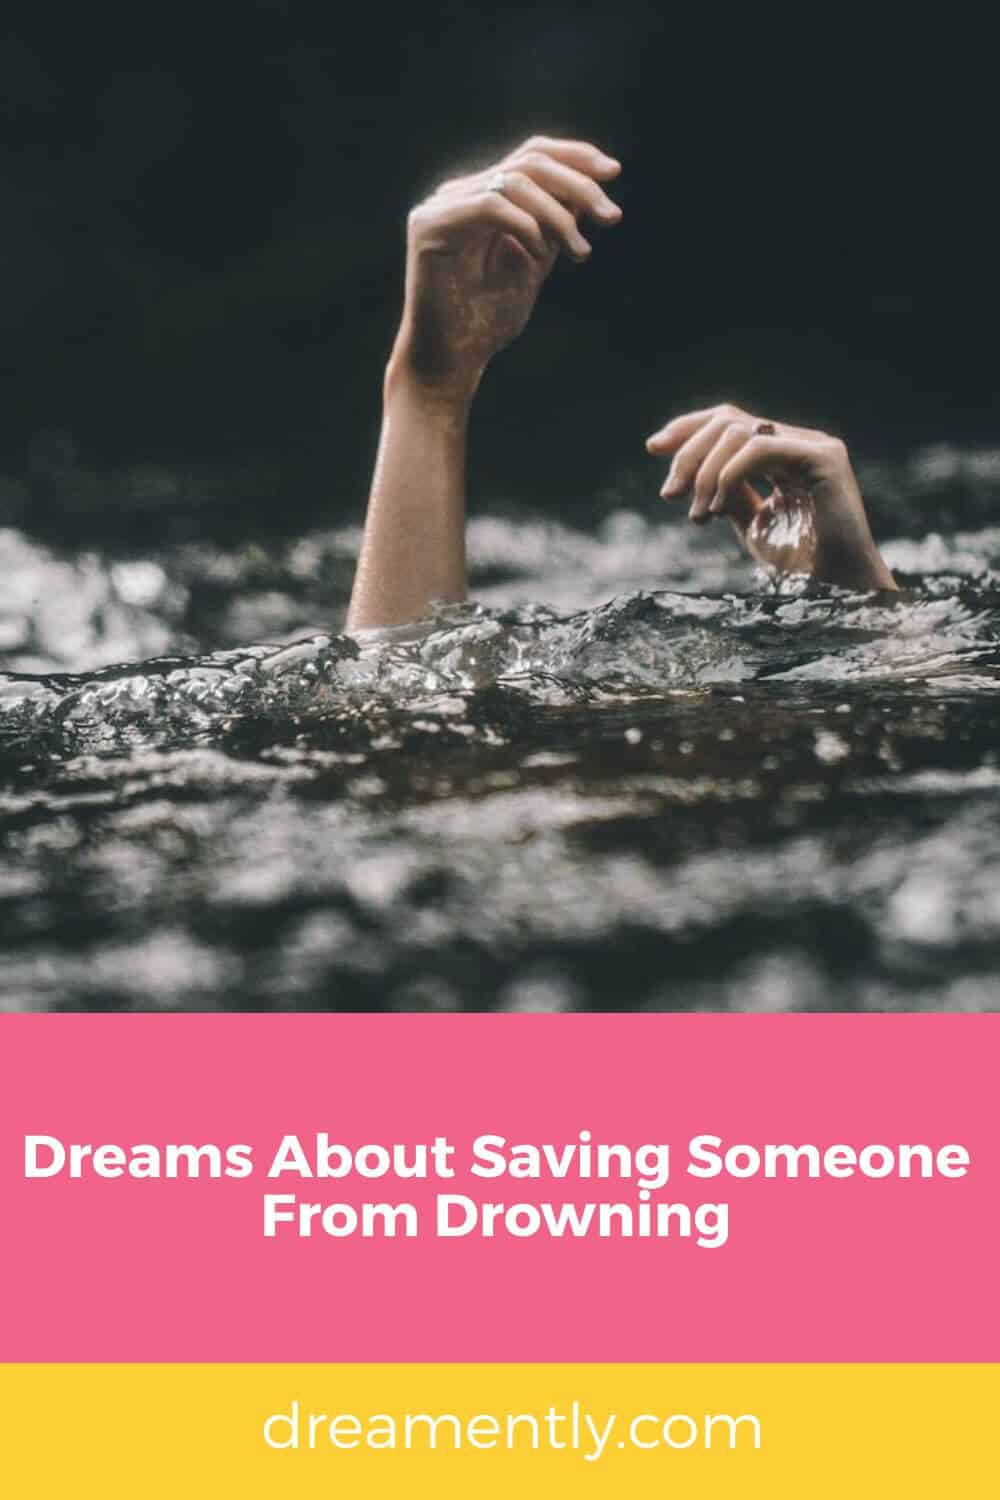 Dreams About Saving Someone From Drowning (2)